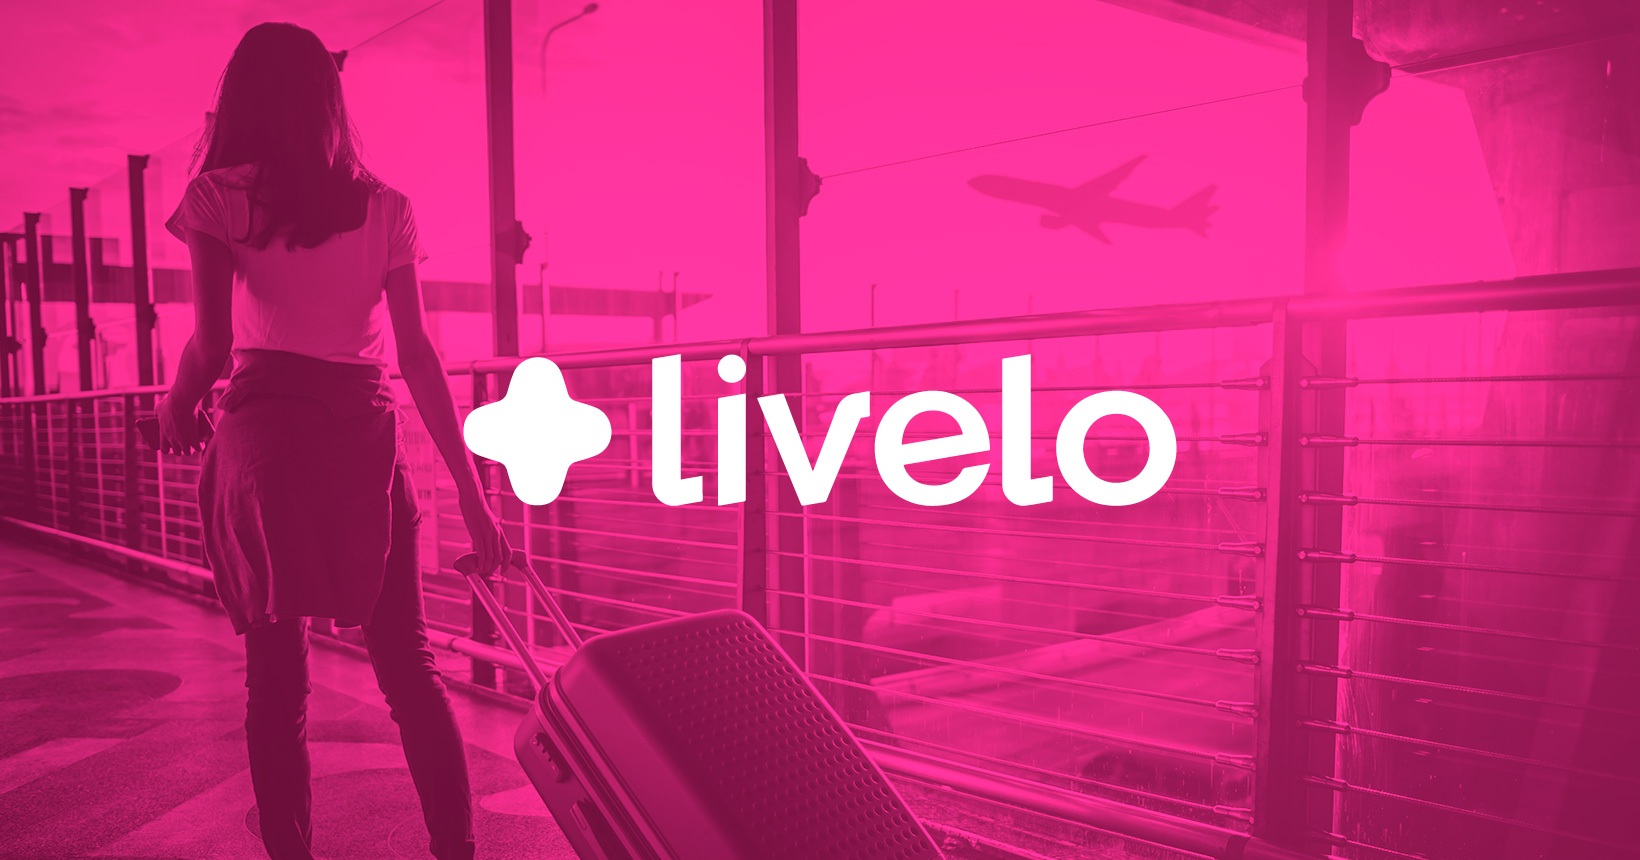 Last day!  Subscribe to Clube Livelo and accumulate up to 180 thousand points in 6 months – thousand from R$ 26.66